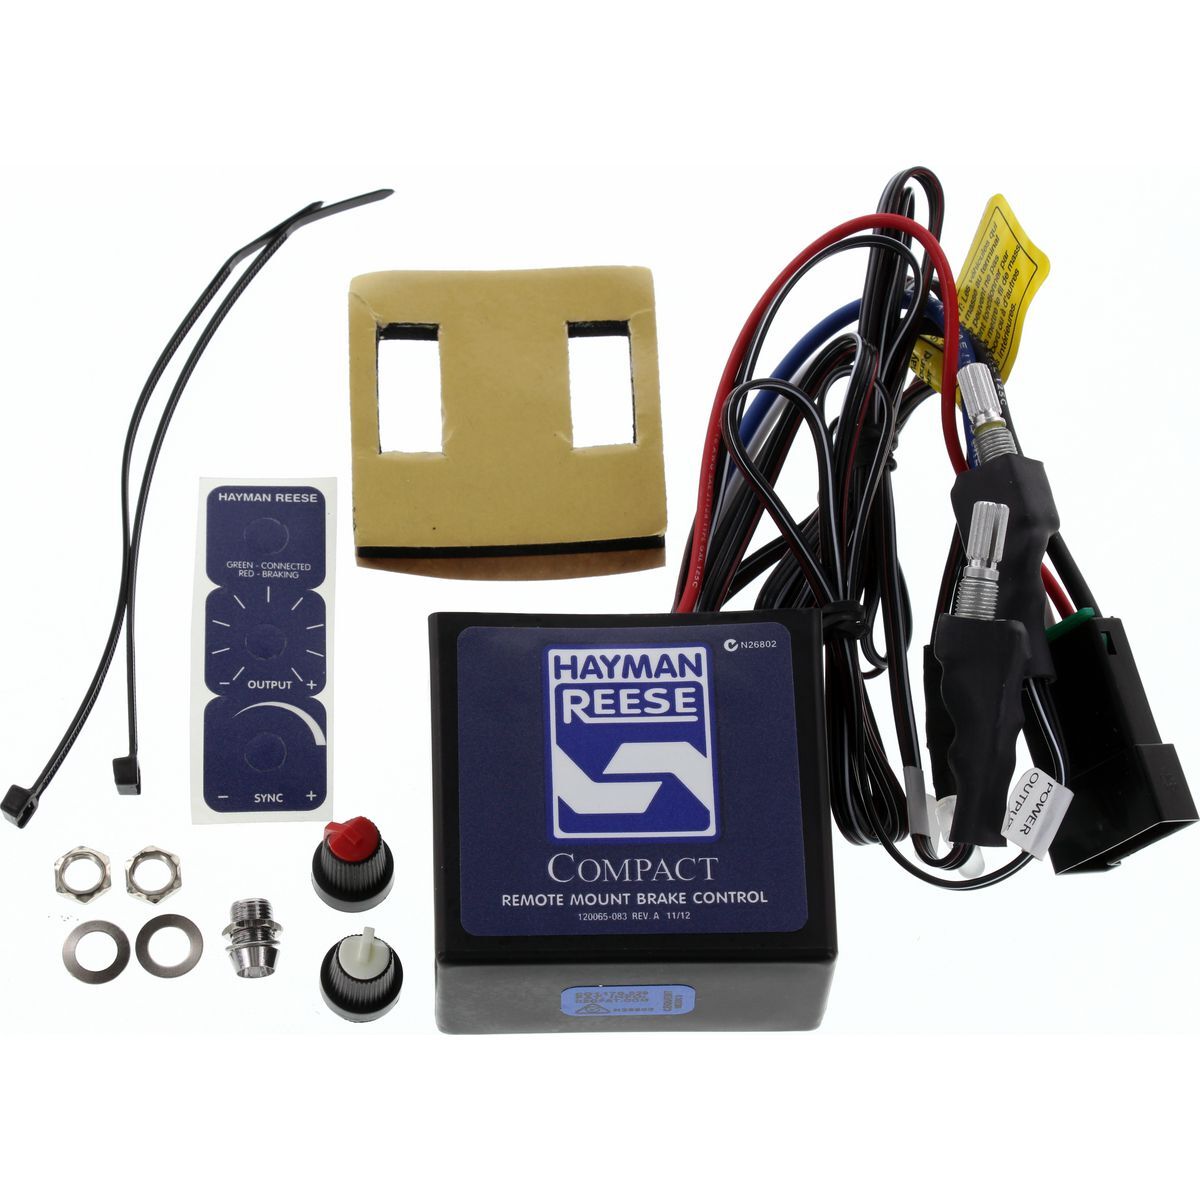 hayman-reese-compact-time-activated-brake-controller-1-3-axles-05550